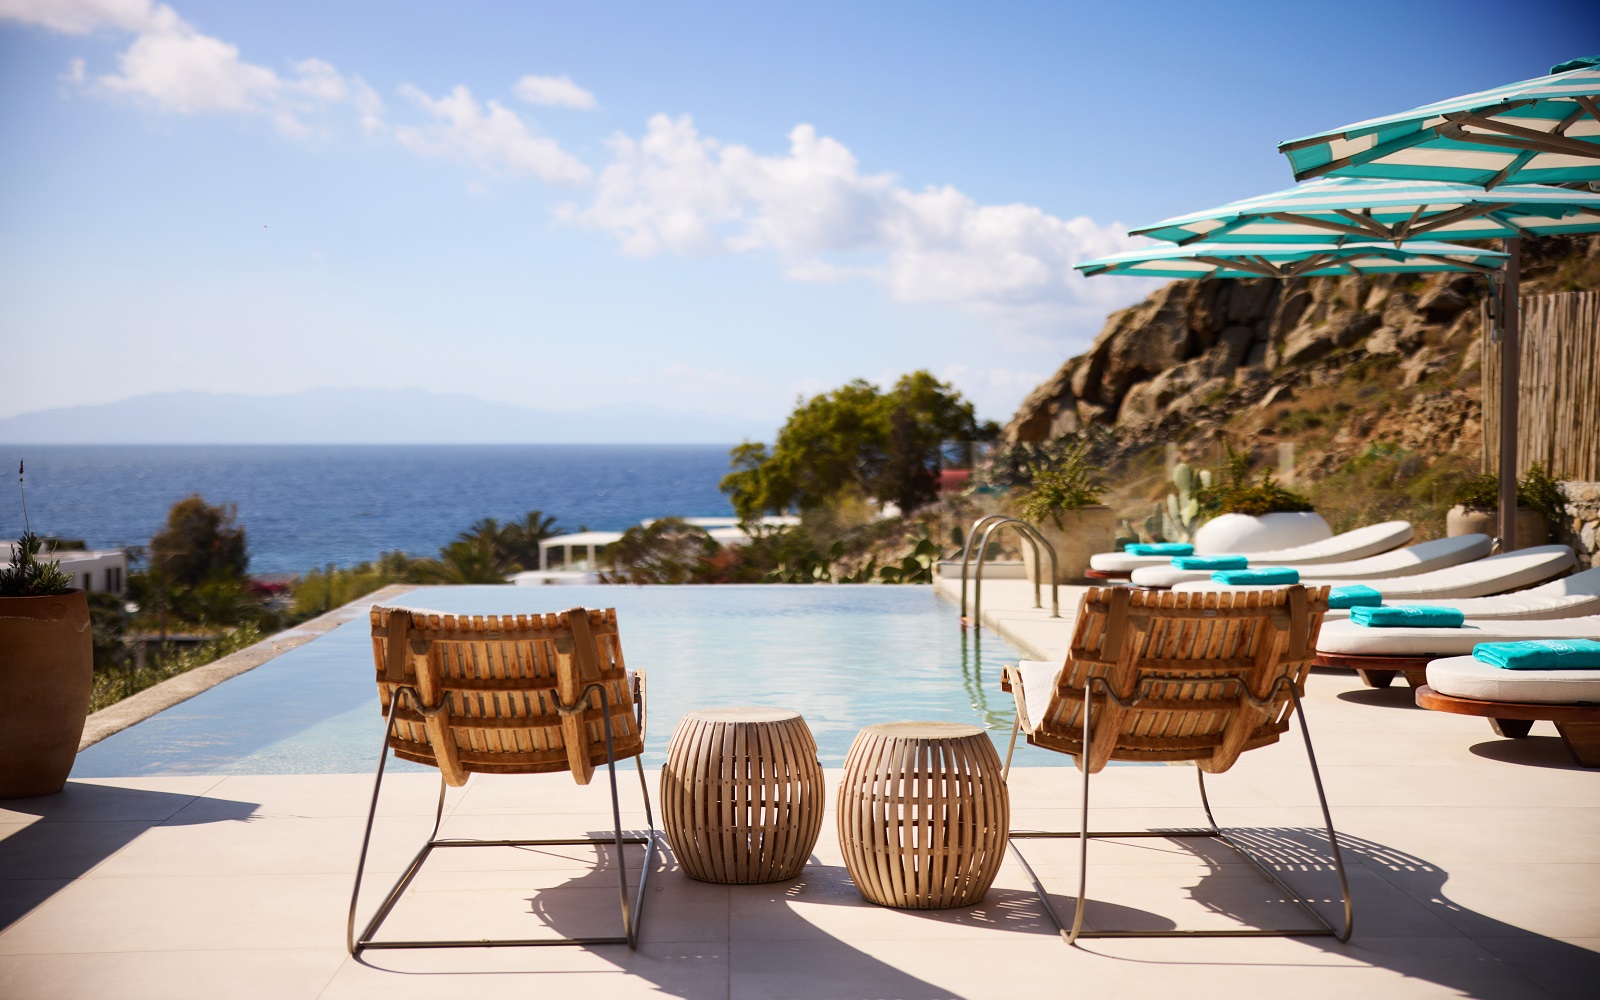 deckchairs and umbrellas by pool with seaview at Nammos Mykonos